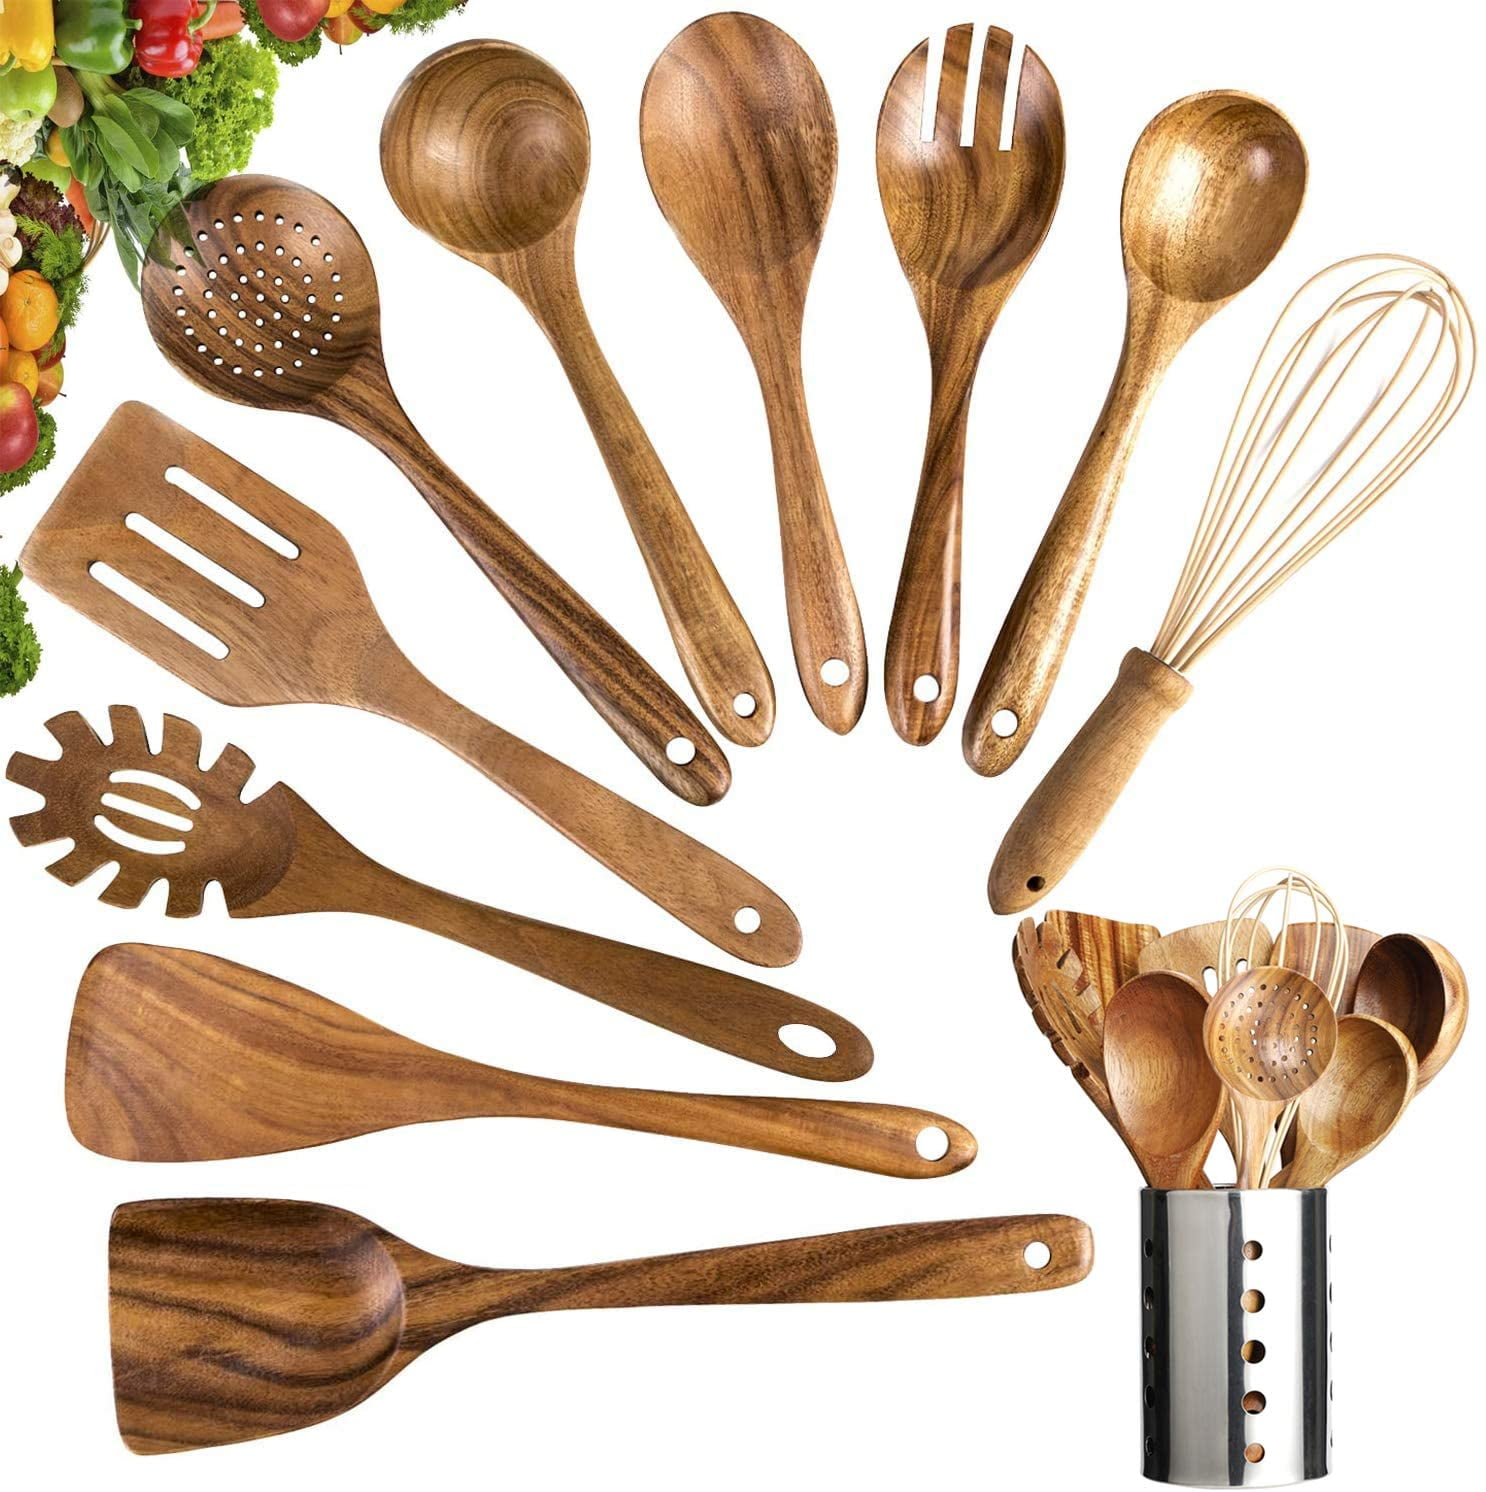 Spoonula FAAY Wooden Spoons for Cooking Spatula Slotted Turner Durable Natural High Moist-Resistant Hardwood and Smooth Polishing 5 In 1 Nonstick Wooden Kitchen Utensil Set: Spoon Scraper 